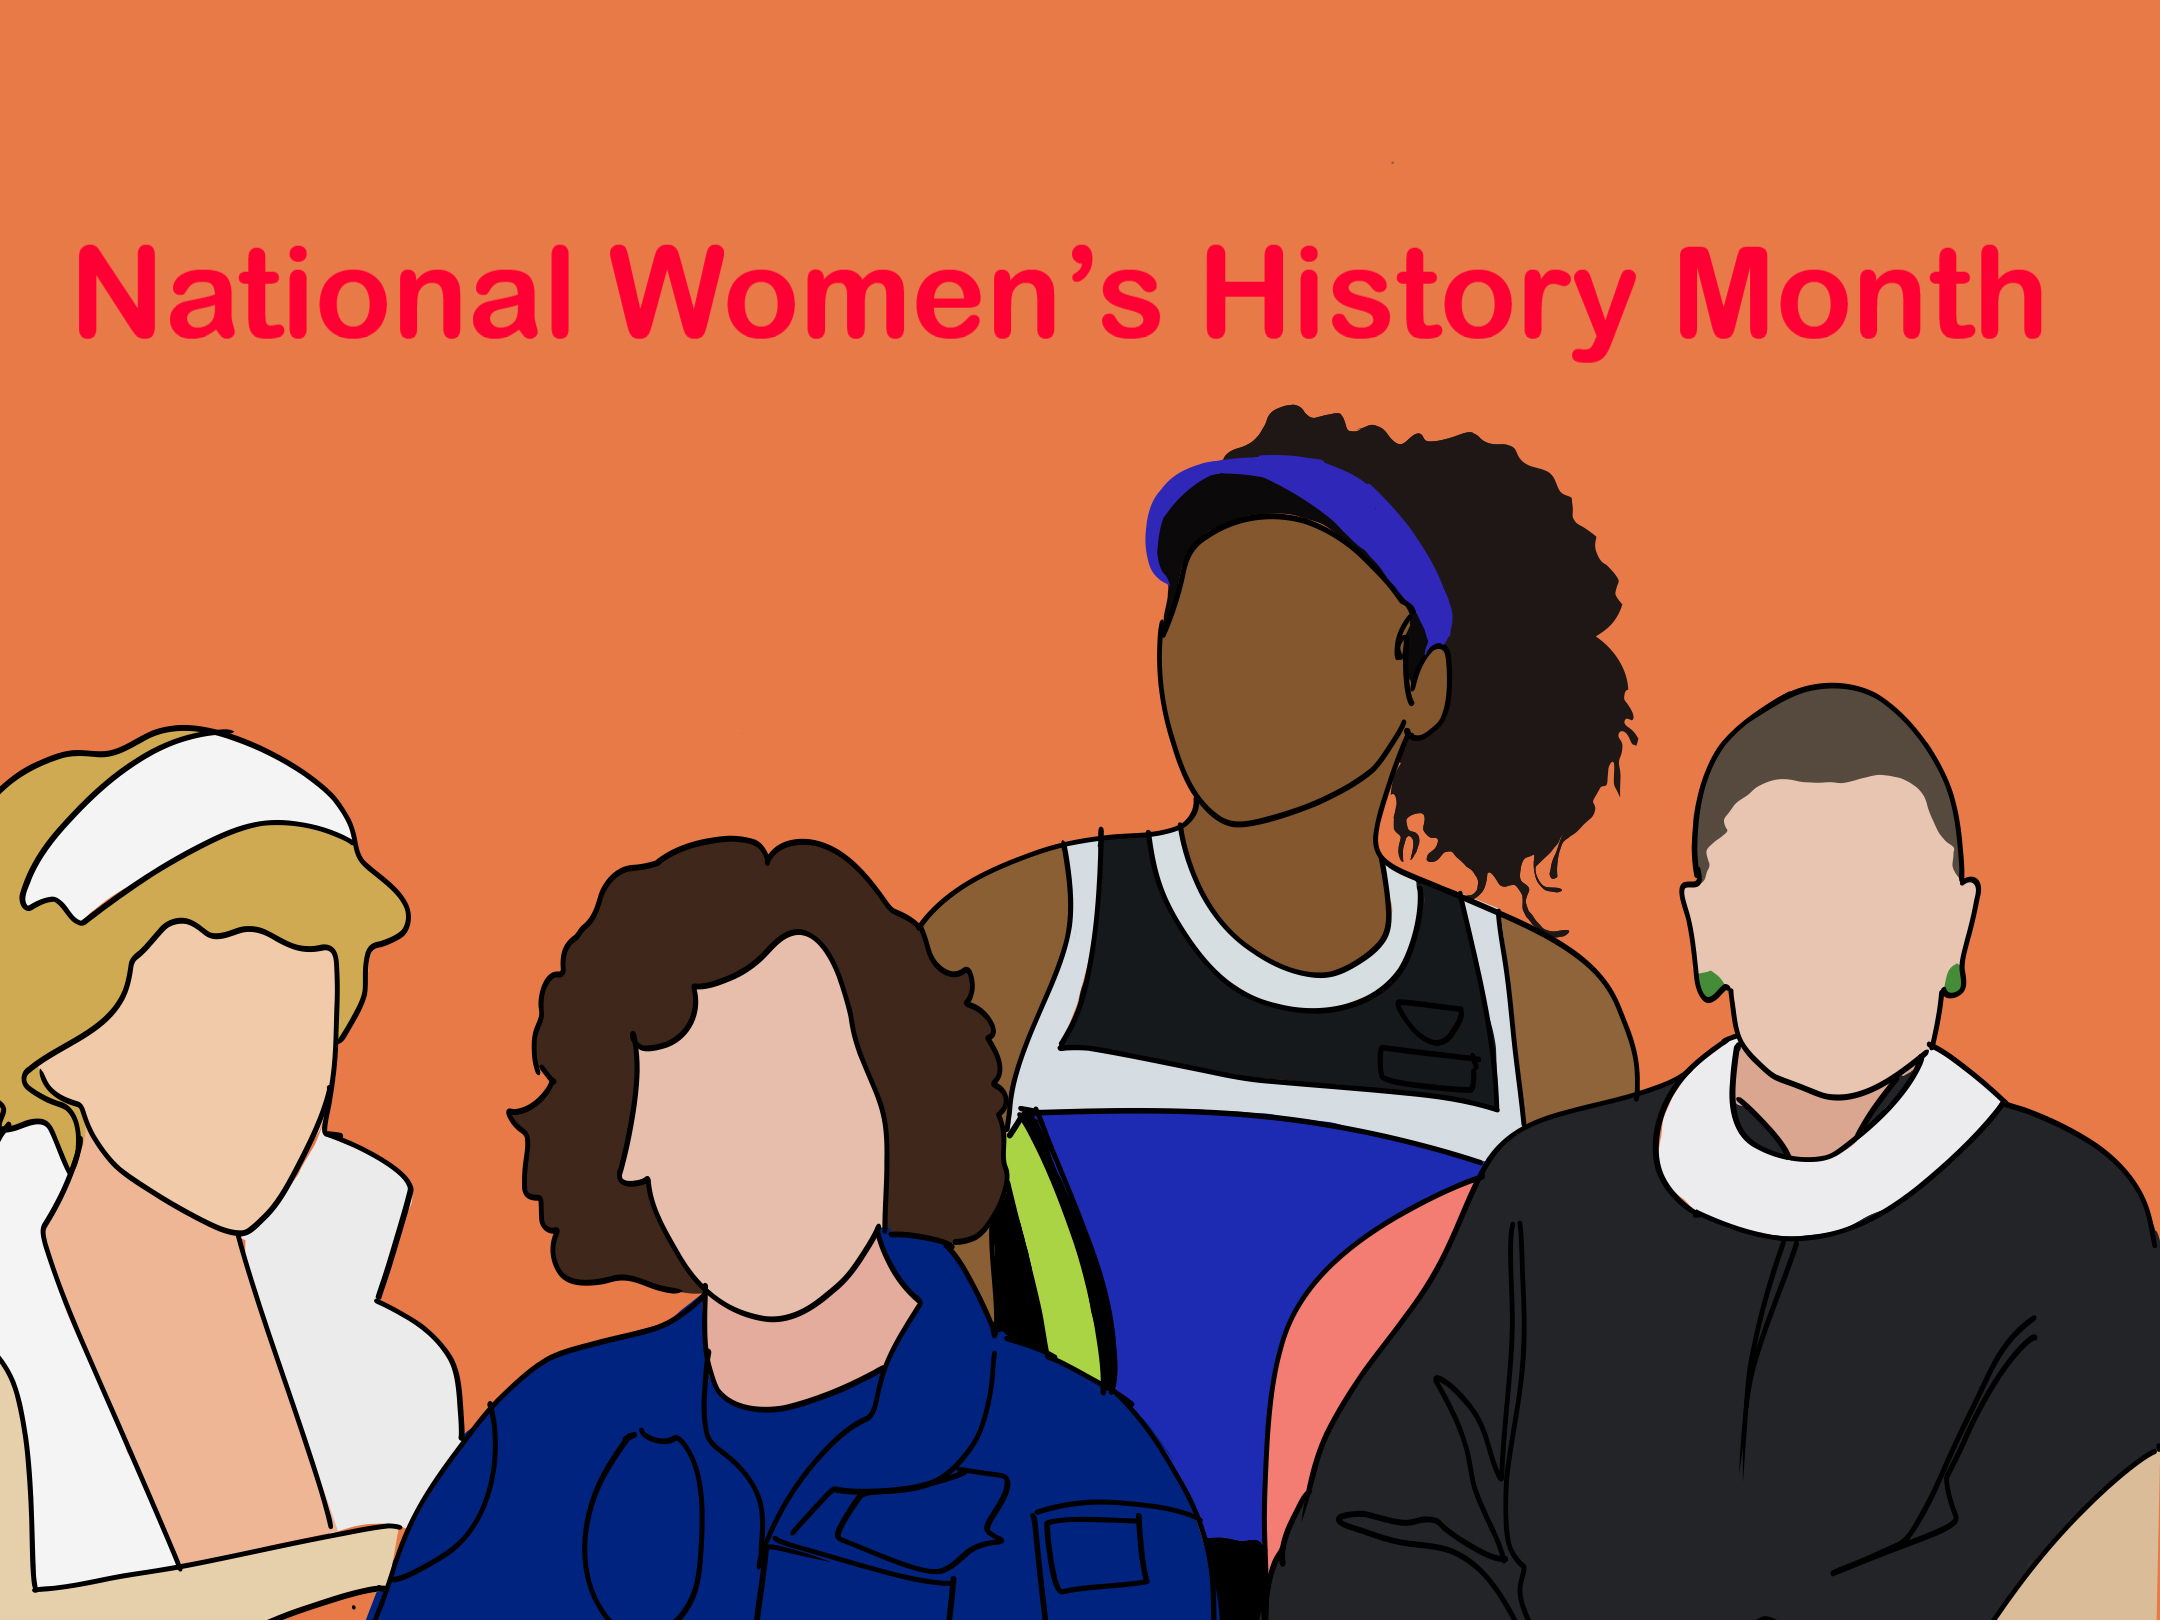 National Womens History Month is month that highlights the contributions of women to history and Modern Society.